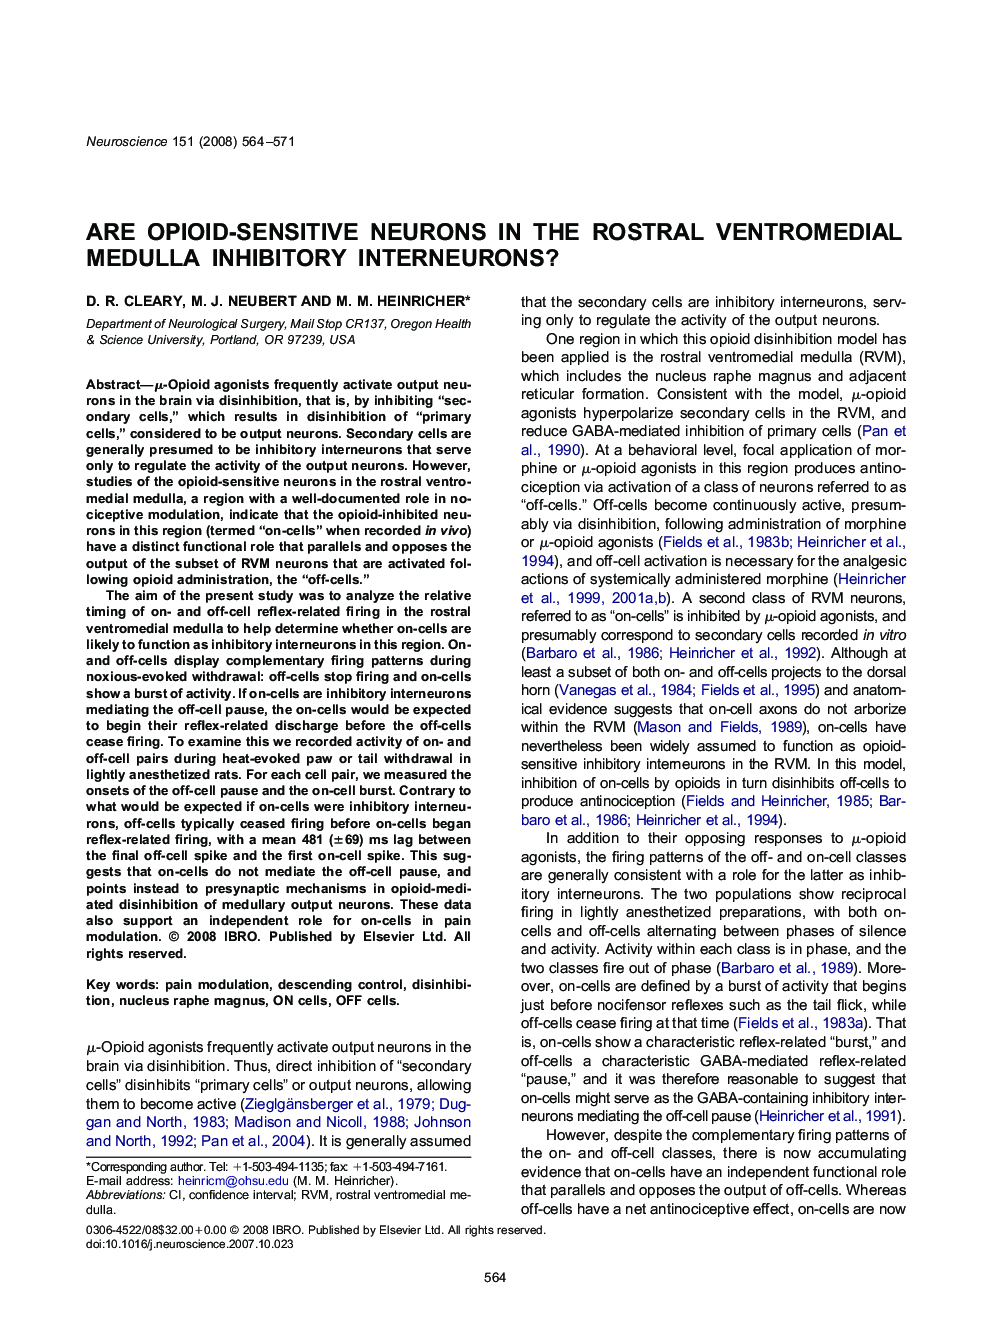 Are opioid-sensitive neurons in the rostral ventromedial medulla inhibitory interneurons?